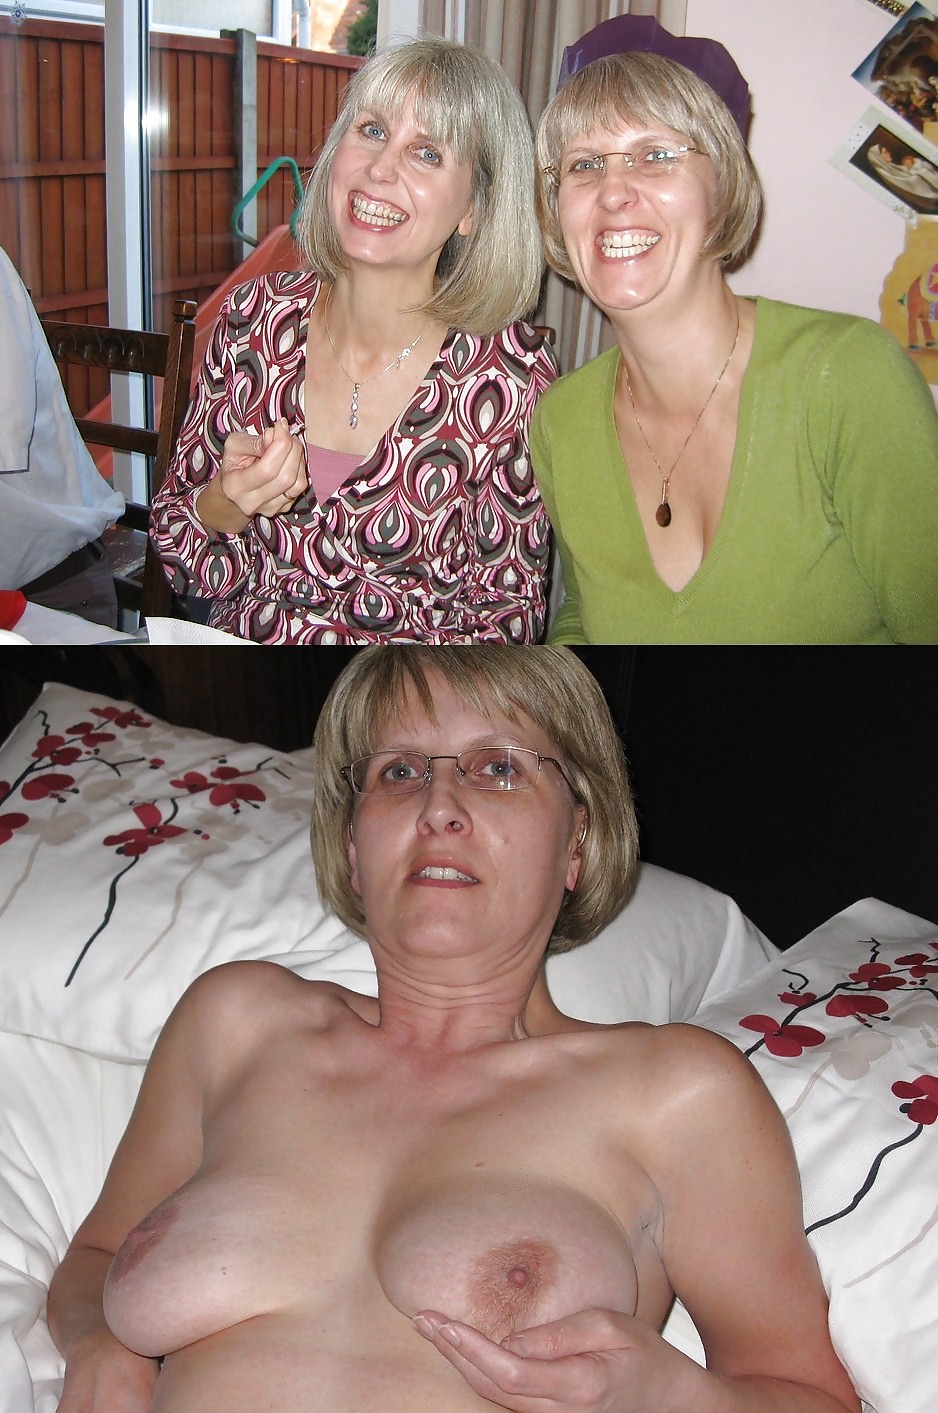 Fat Skinny Ugly Freaky Old Young Quirky-Part 10 adult photos